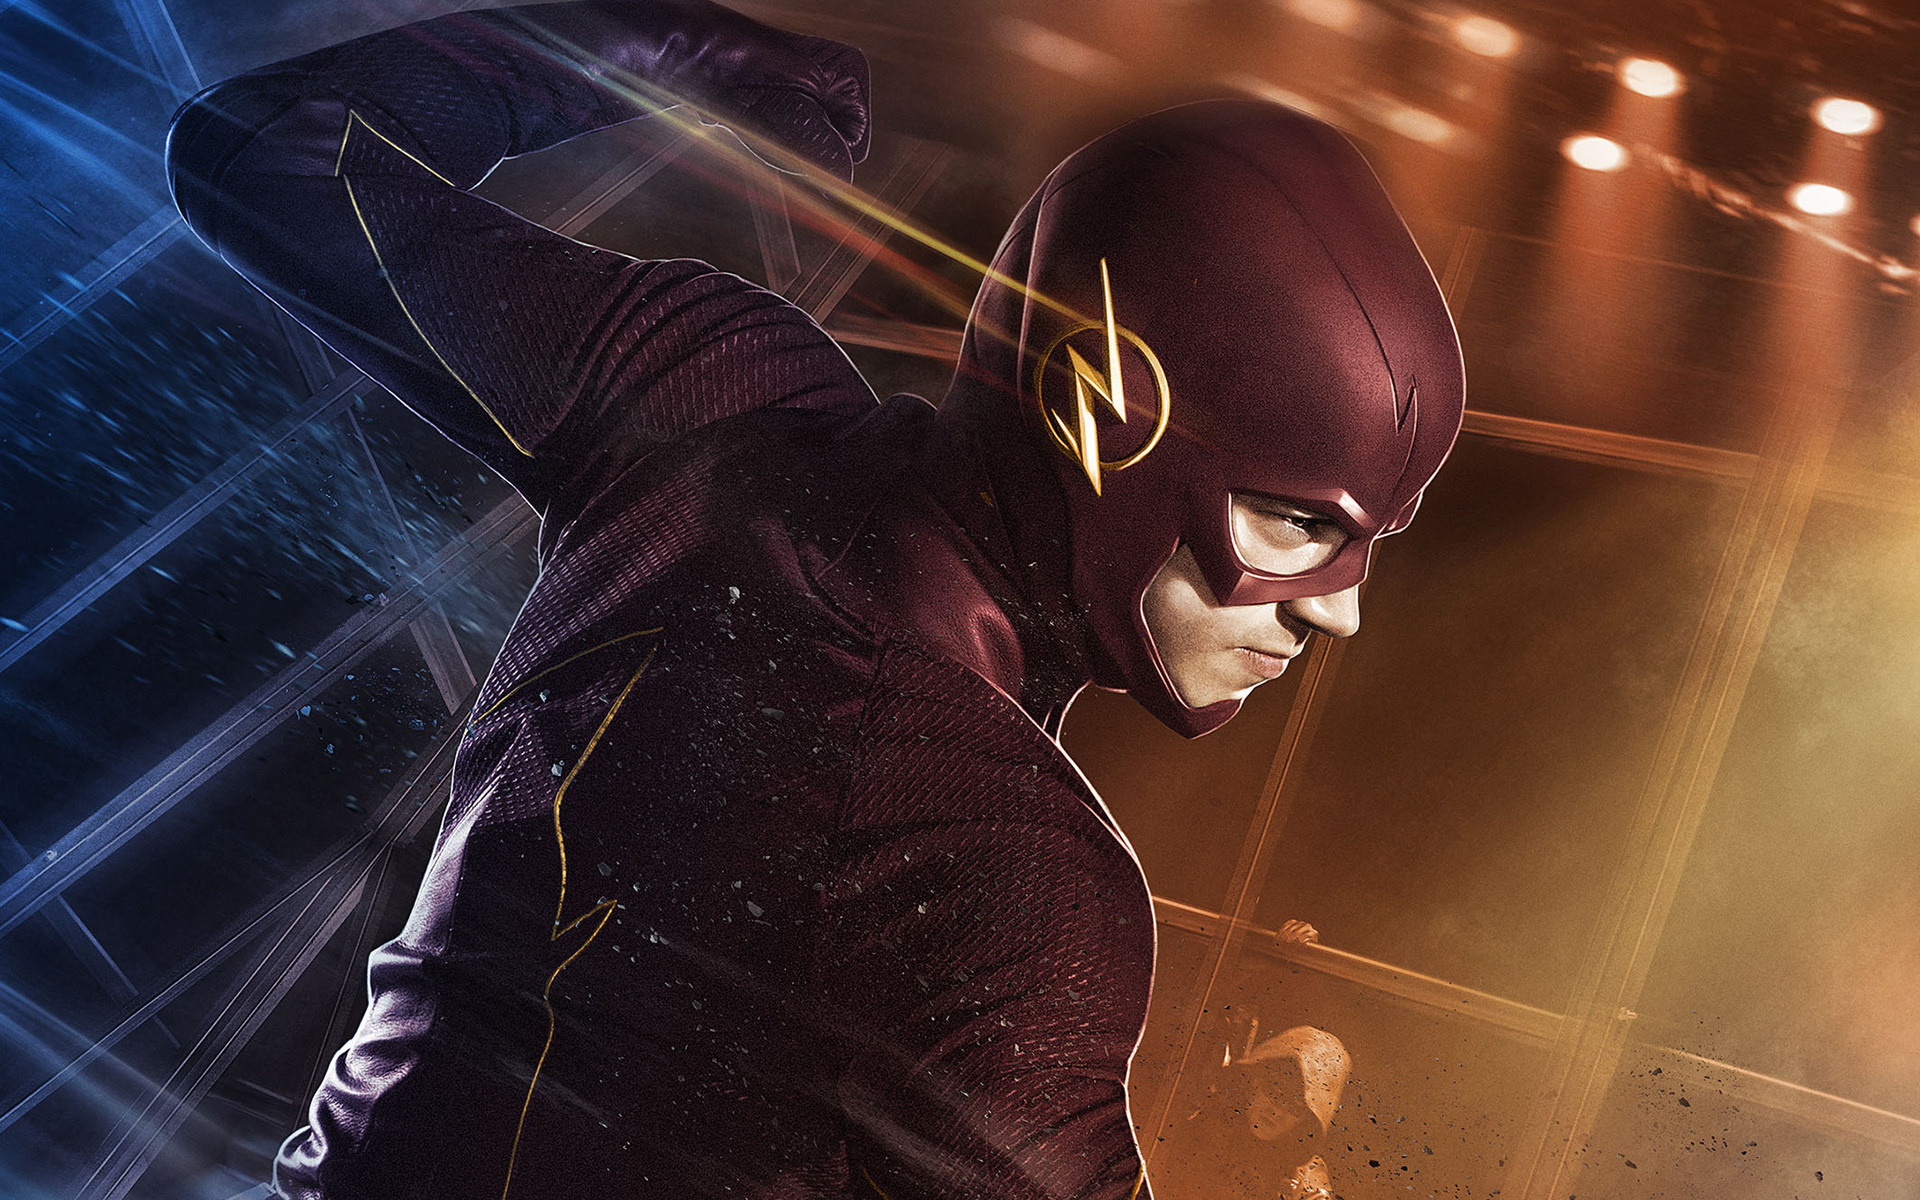 Grant Gustin as Barry Allen The Flash Wallpapers - HD Wallpapers ...